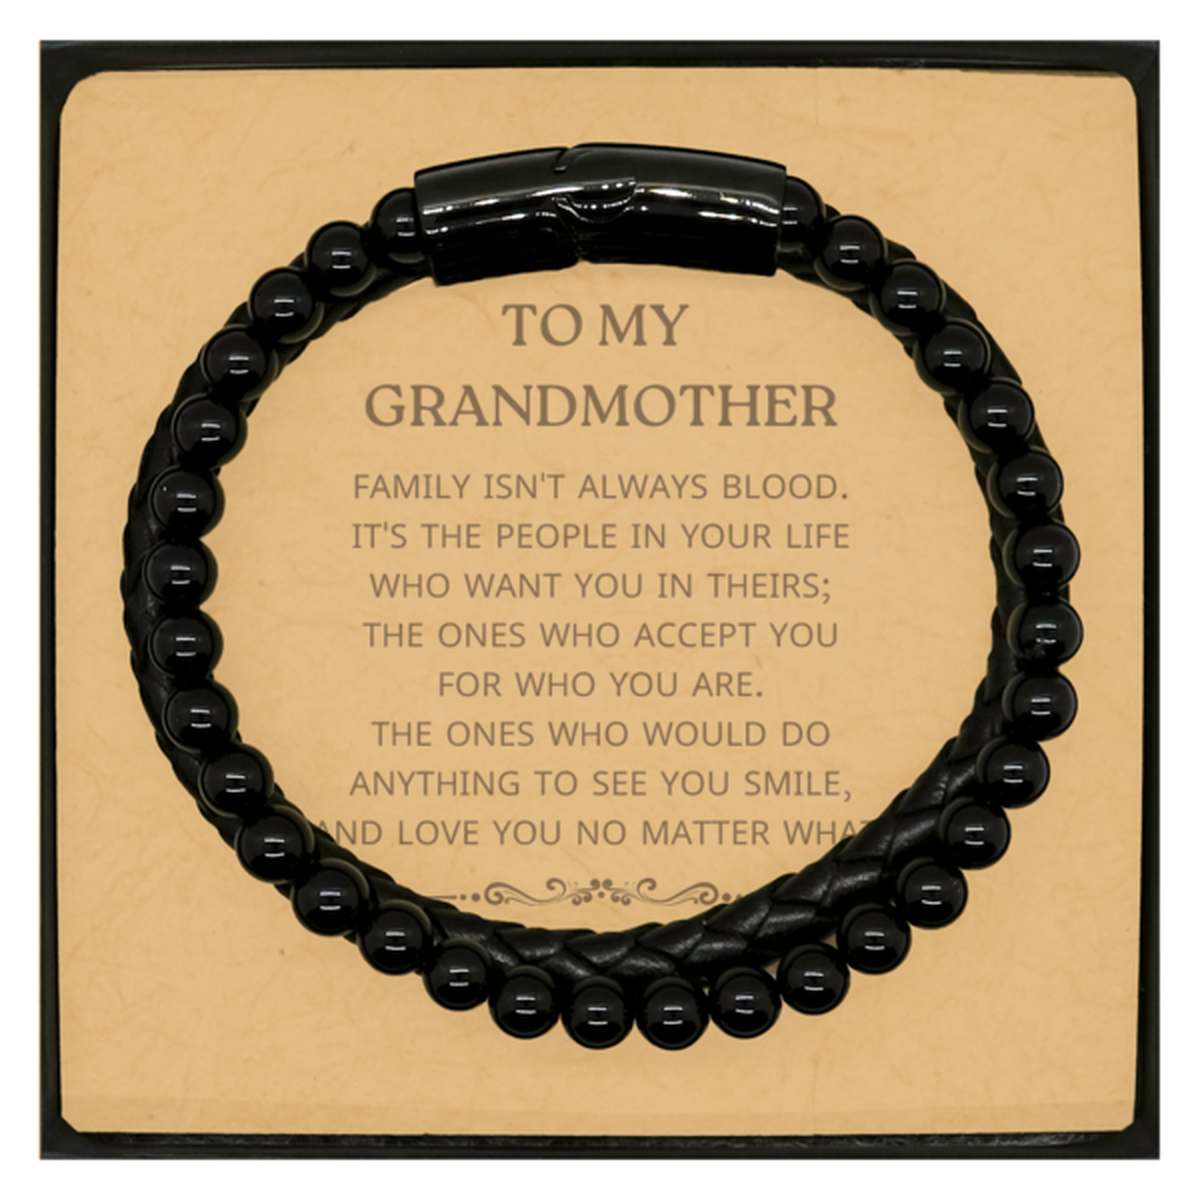 To My Grandmother Gifts, Family isn't always blood, Grandmother Stone Leather Bracelets, Birthday Christmas Unique Present For Grandmother